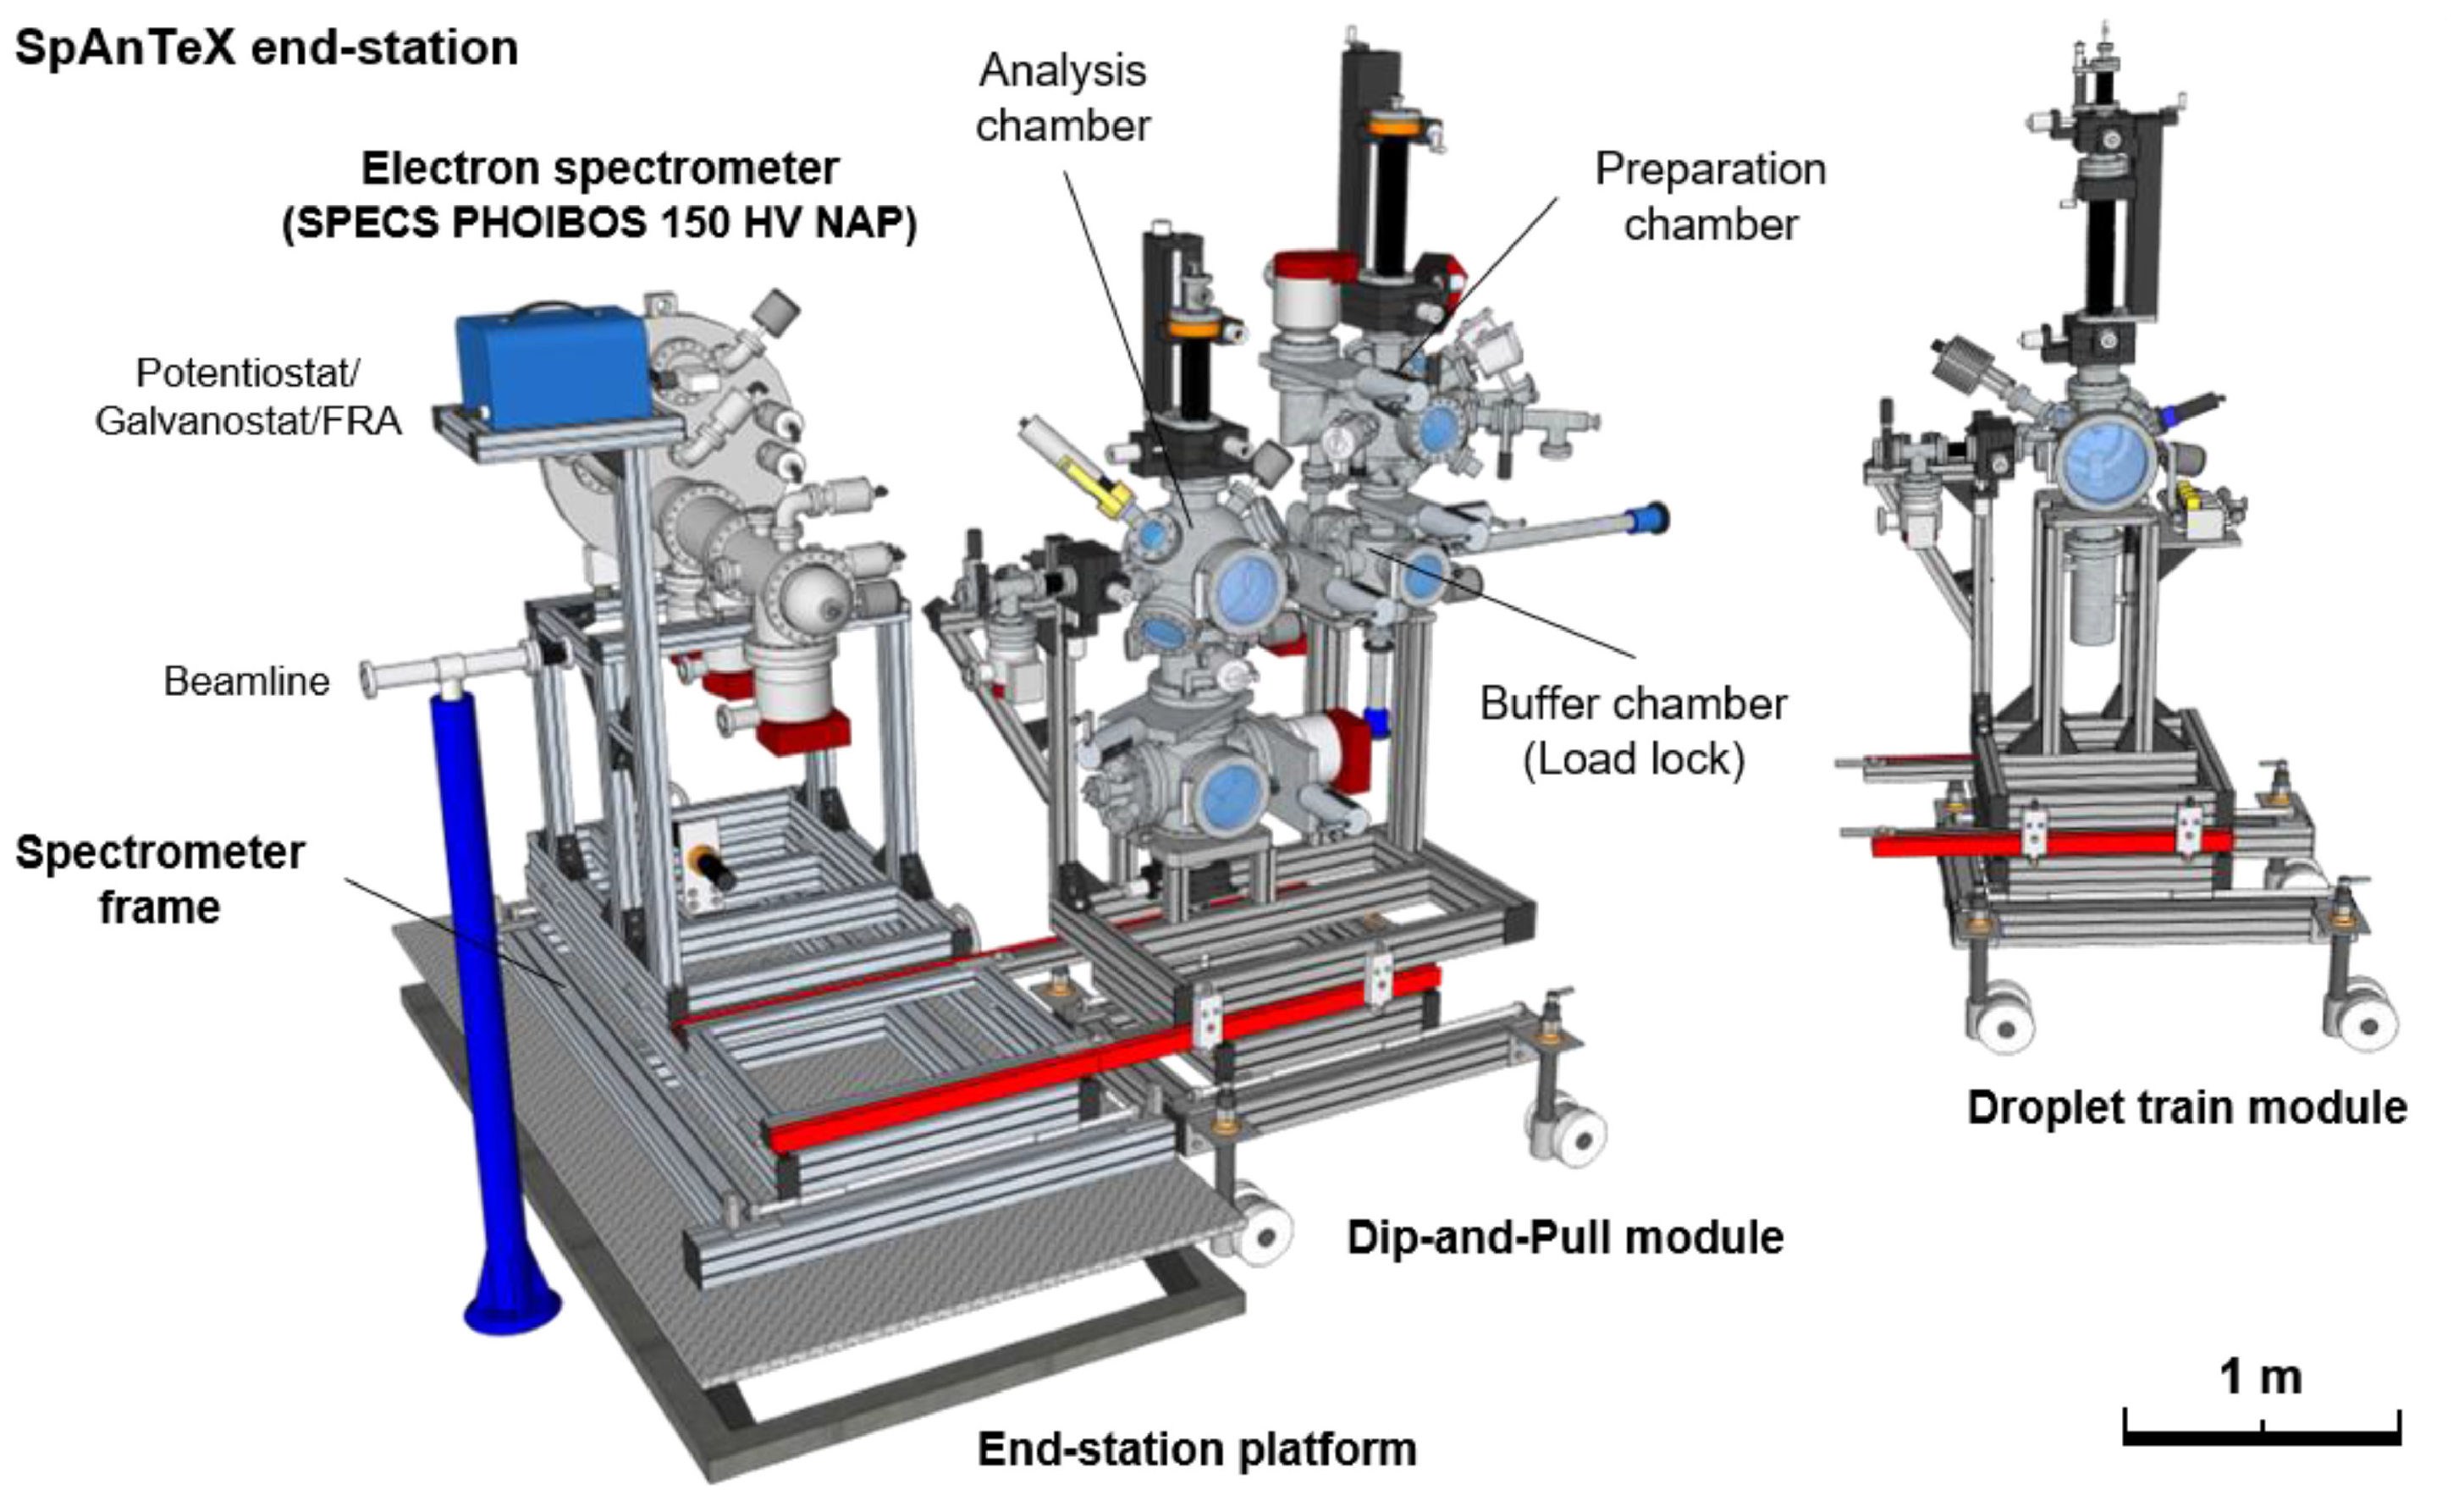 3-dimensional drawings of SpAnTeX. The end-station has two independent frames: one for the differentially-pumped electron spectrometer and another for an experimental module, e.g., a Dip-and-Pull.